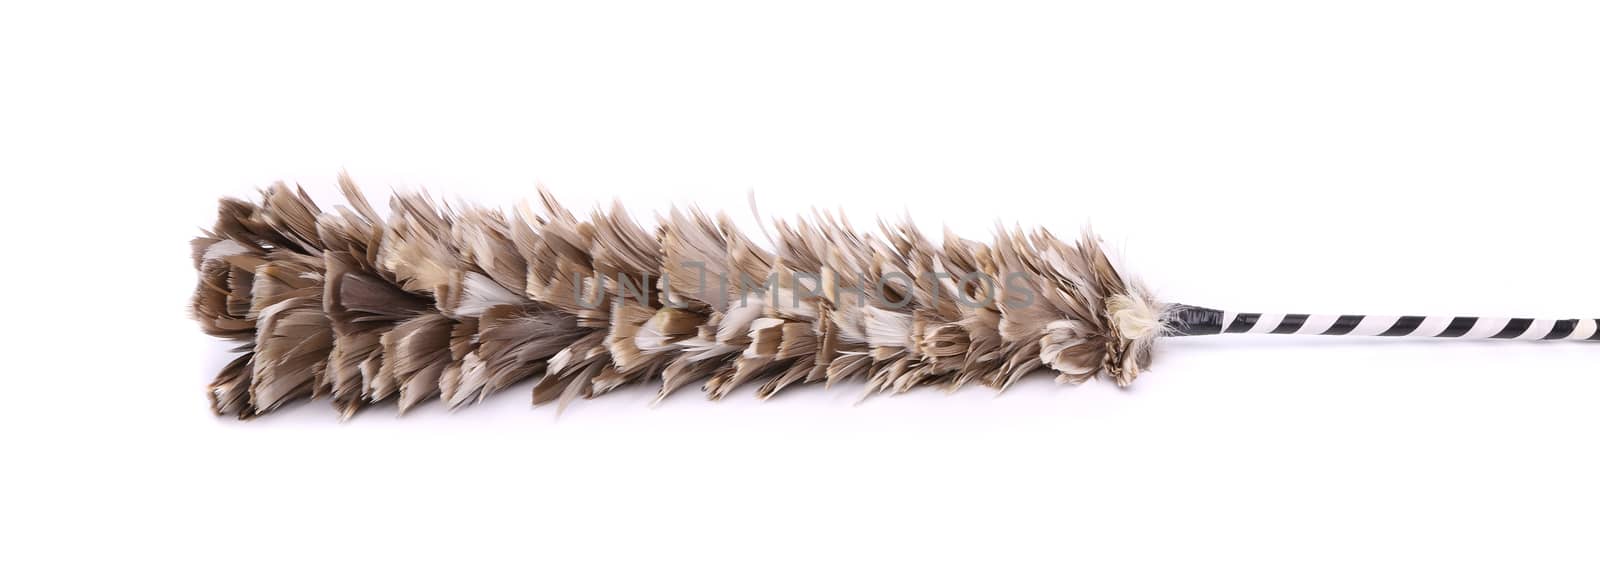 broom to sweep dust feather on white background